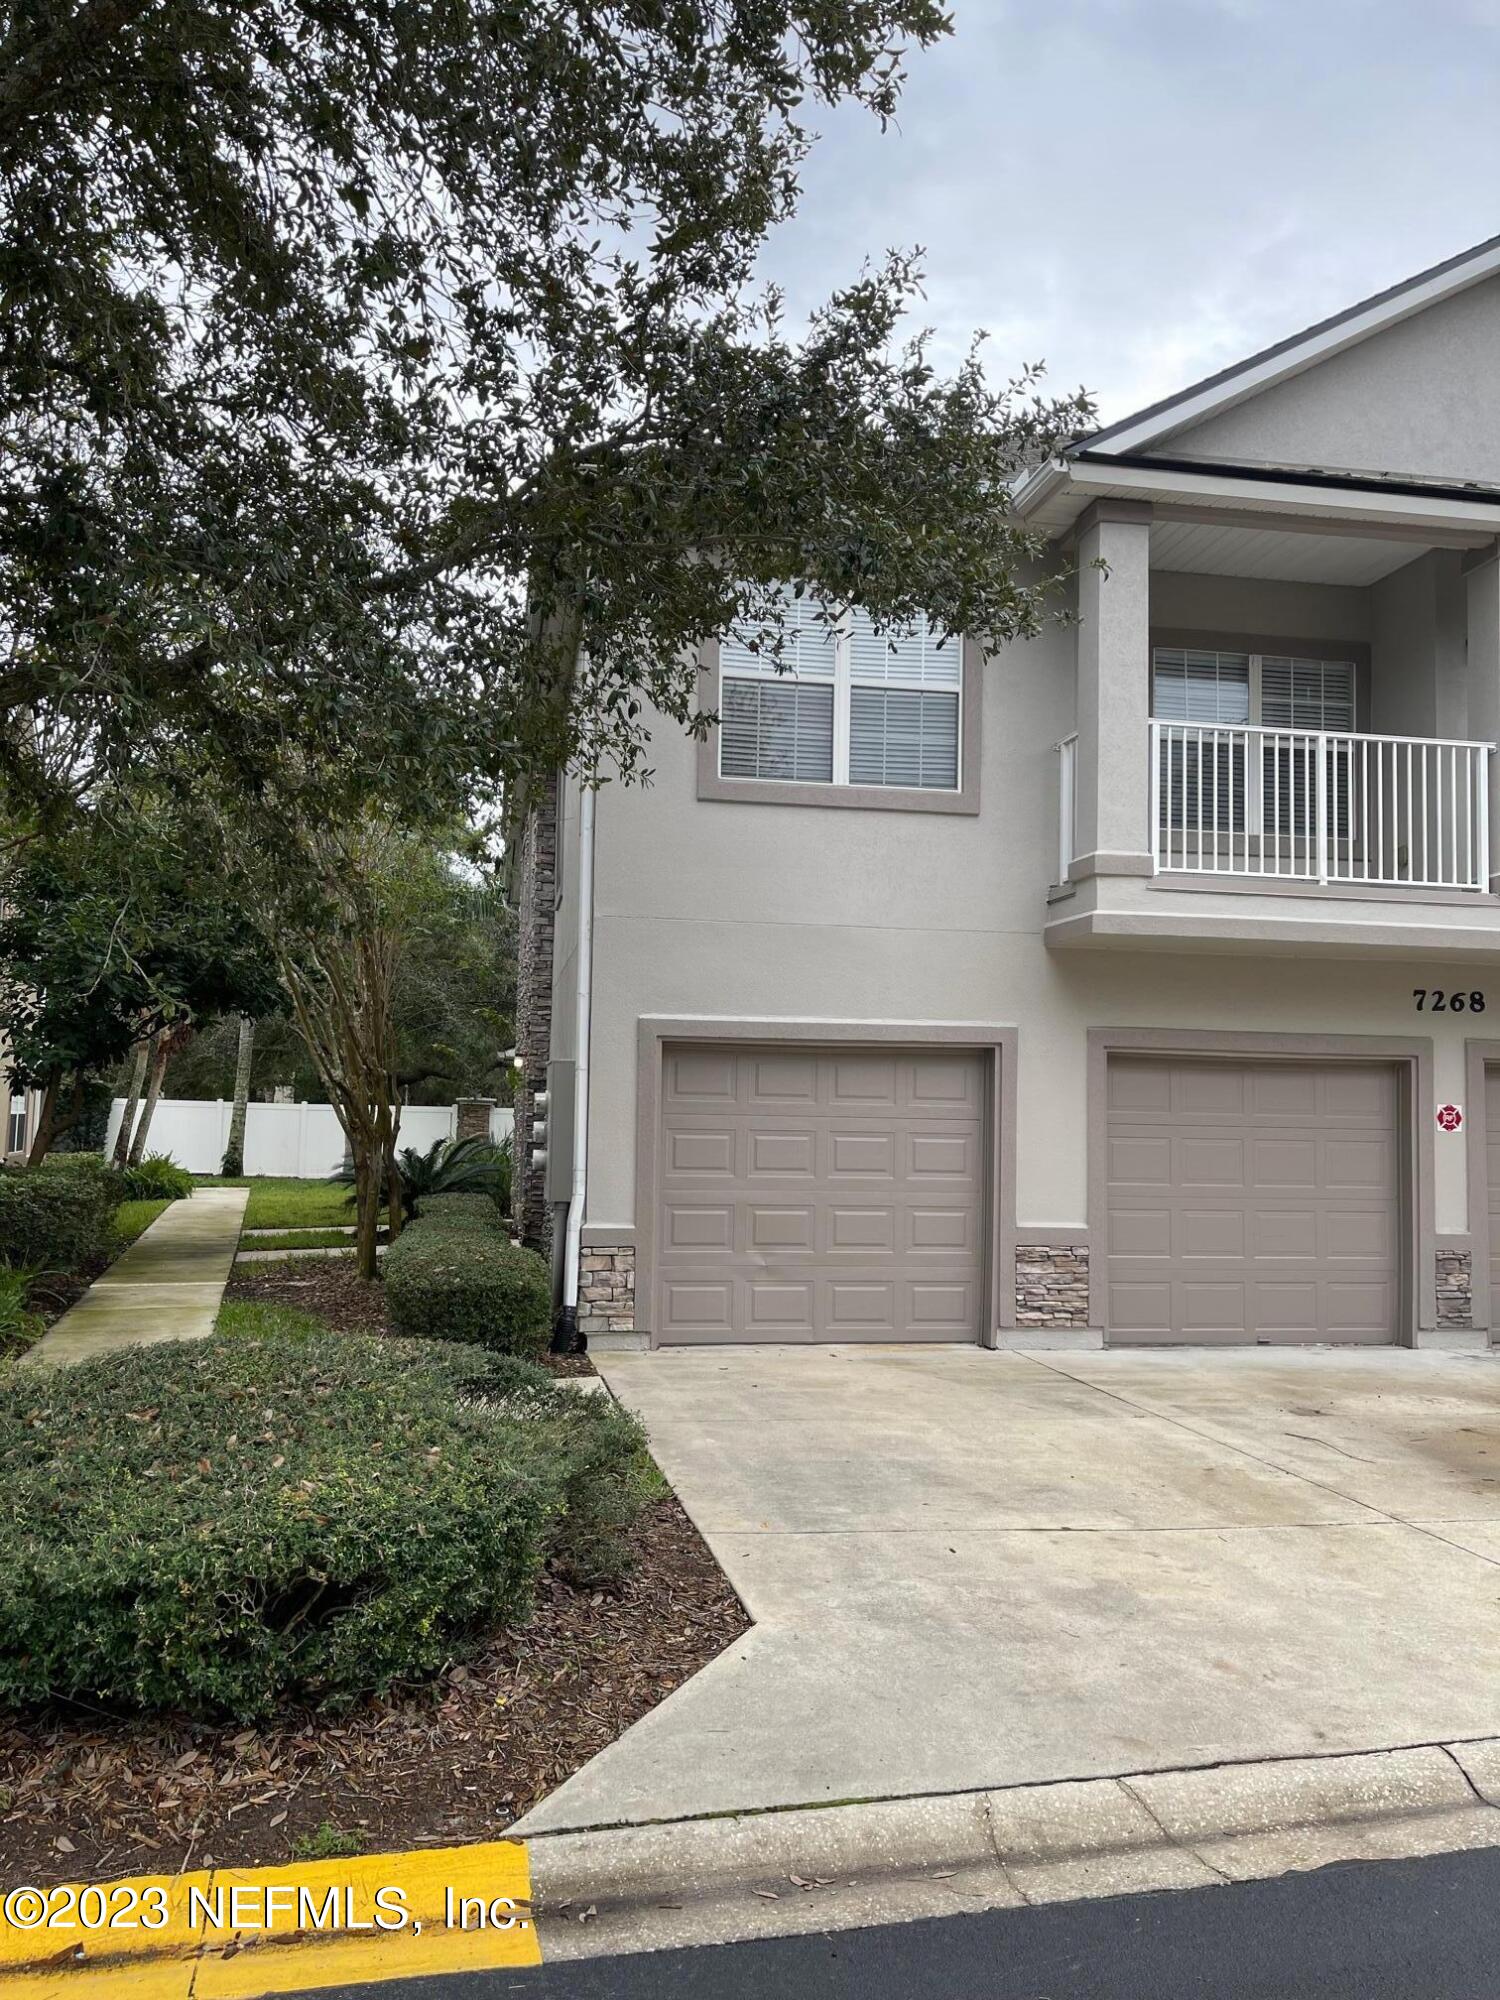 Jacksonville, FL home for sale located at 7268 Deerfoot Point Circle Unit 3-2, Jacksonville, FL 32256